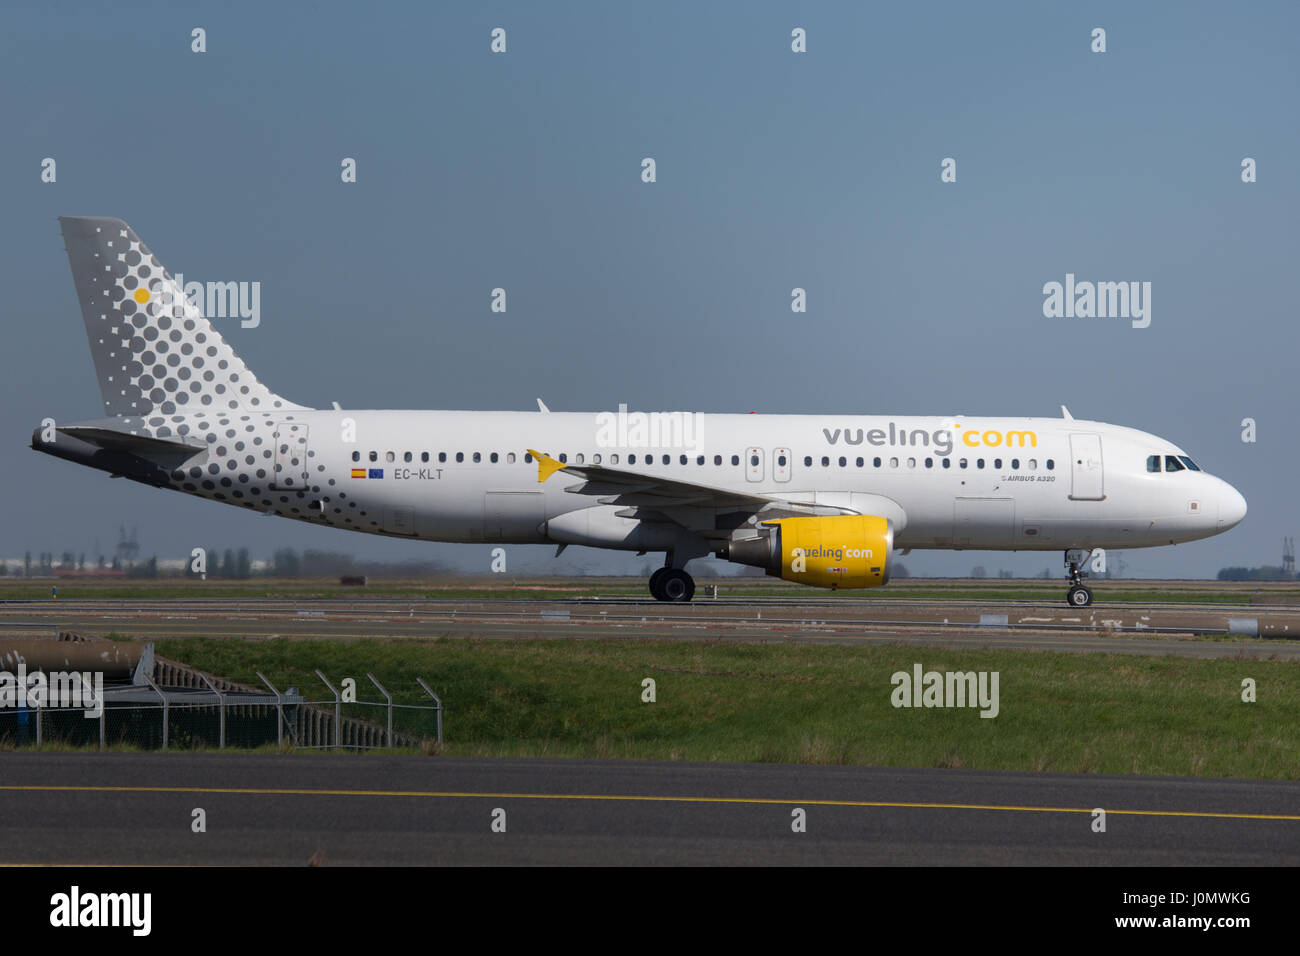 Vueling Airlines Airbus A320 Stockfoto